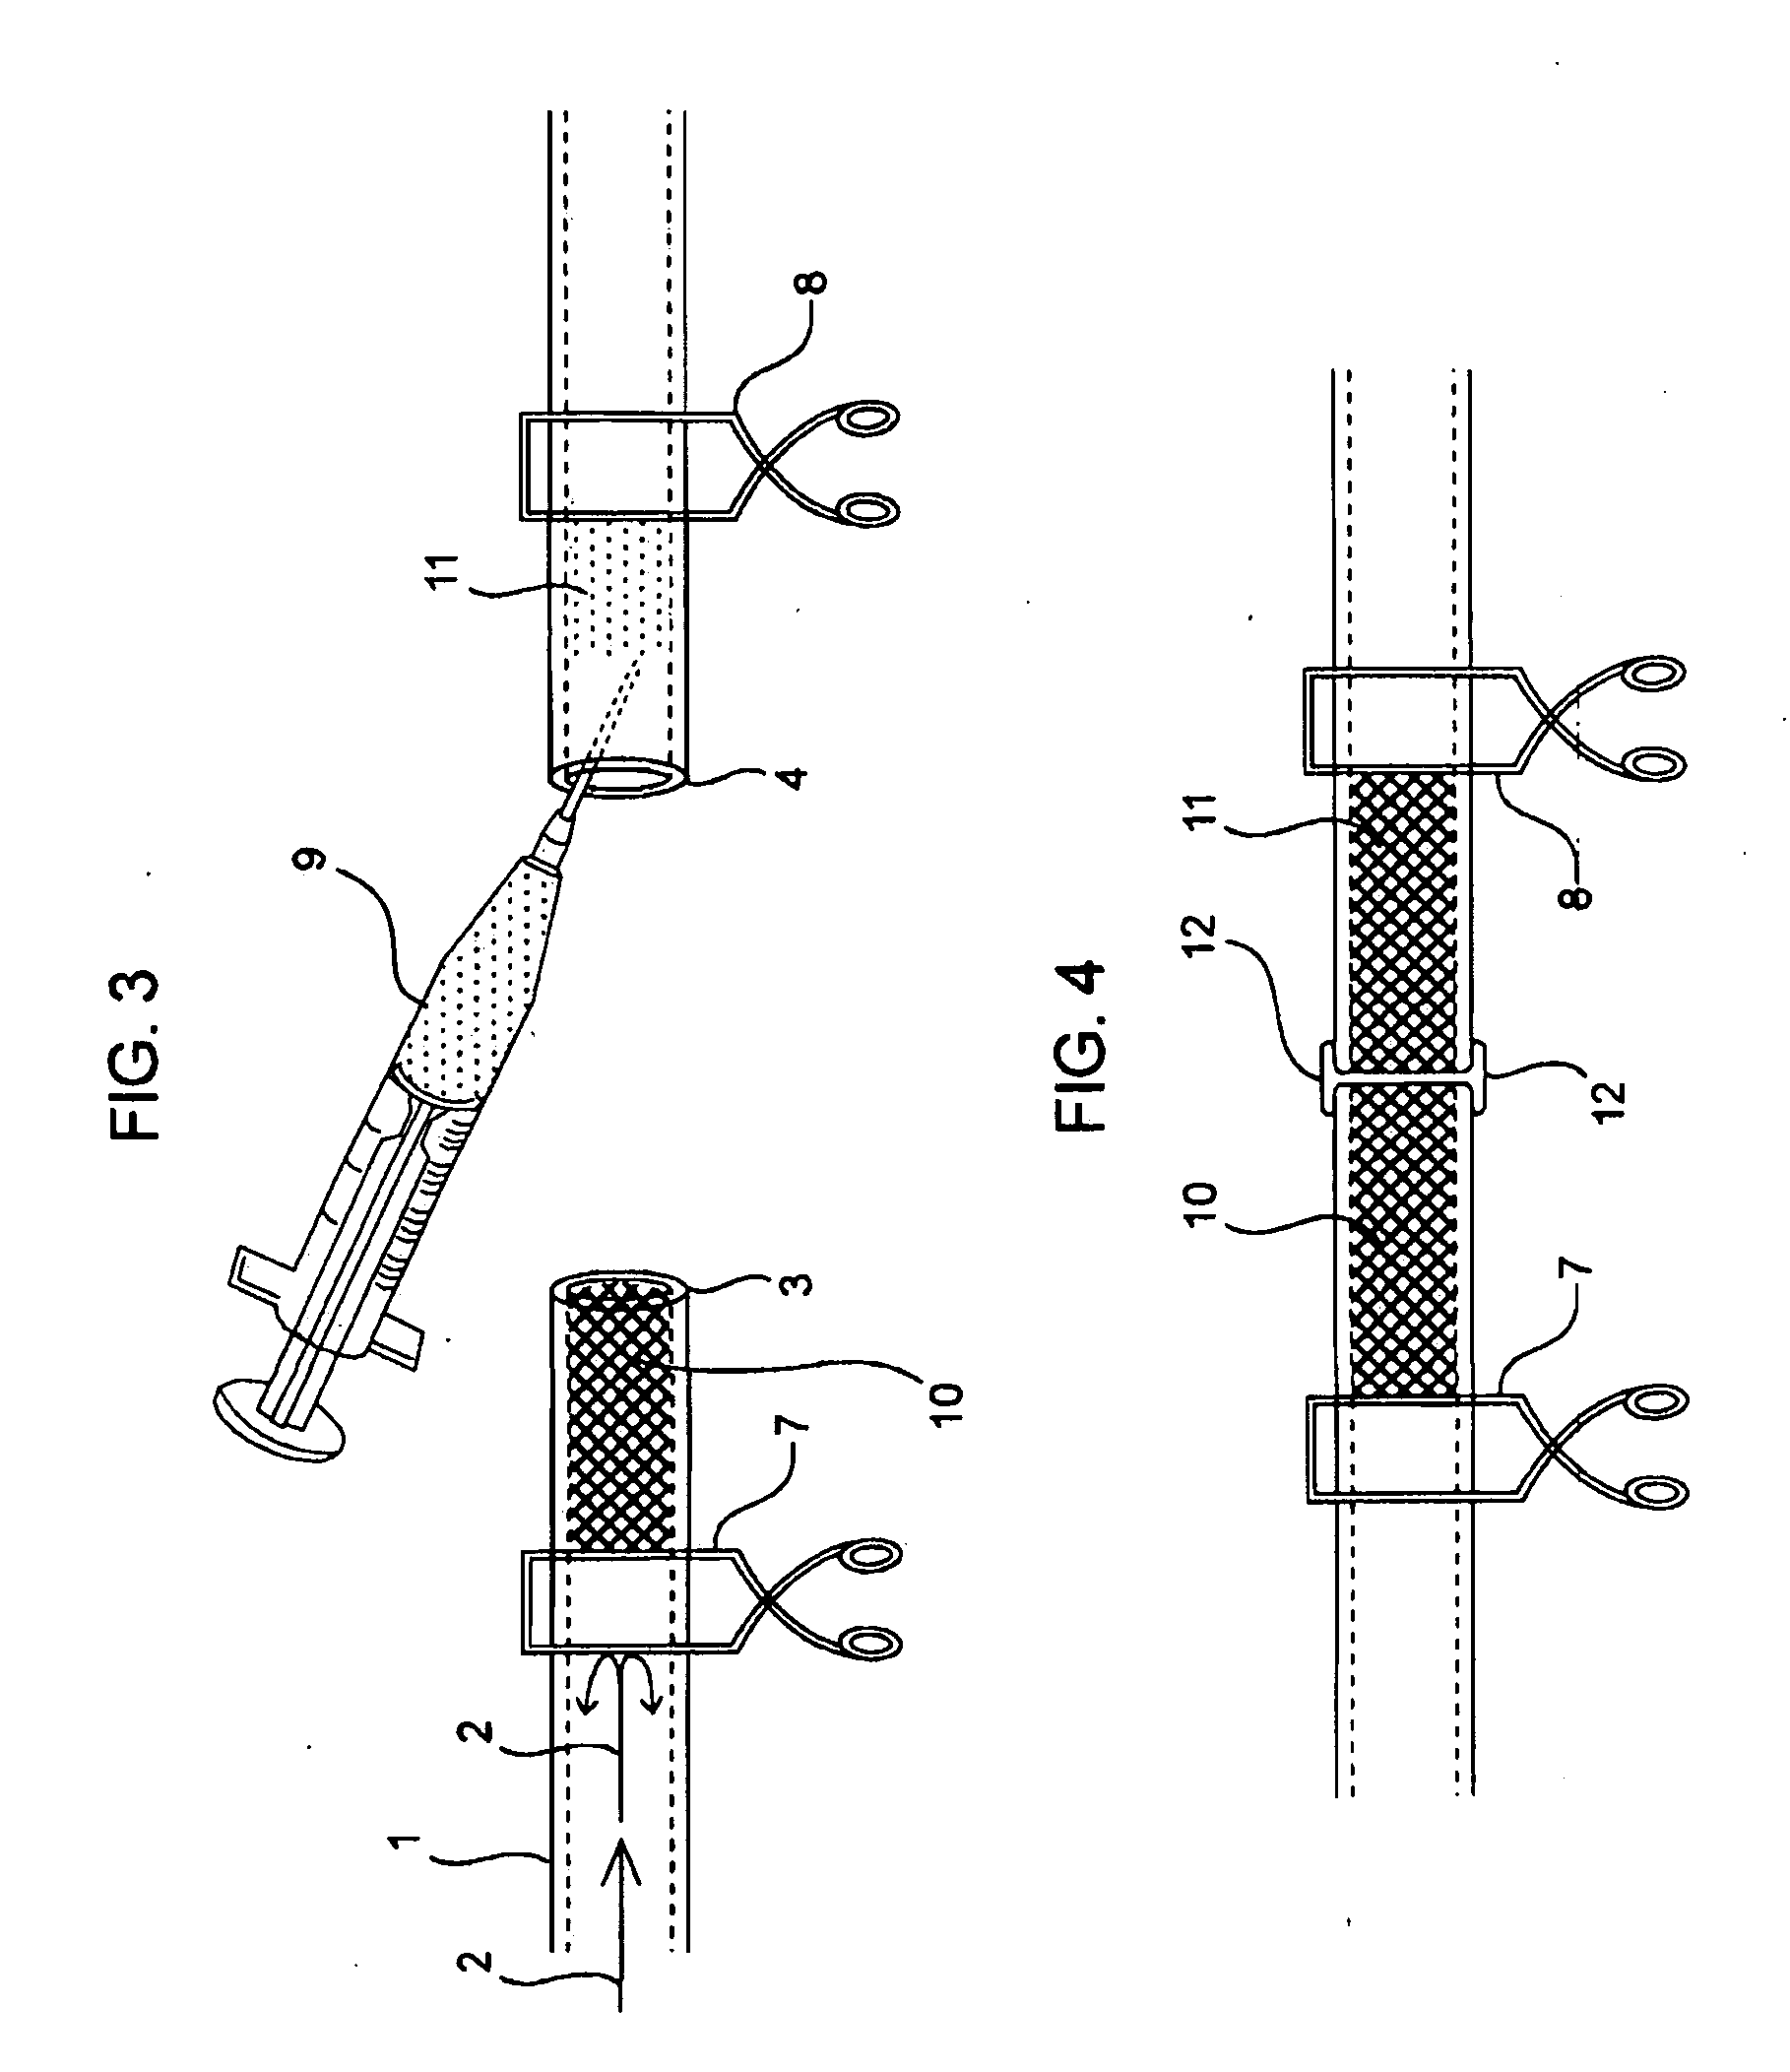 Compositions and methods for joining non-conjoined lumens